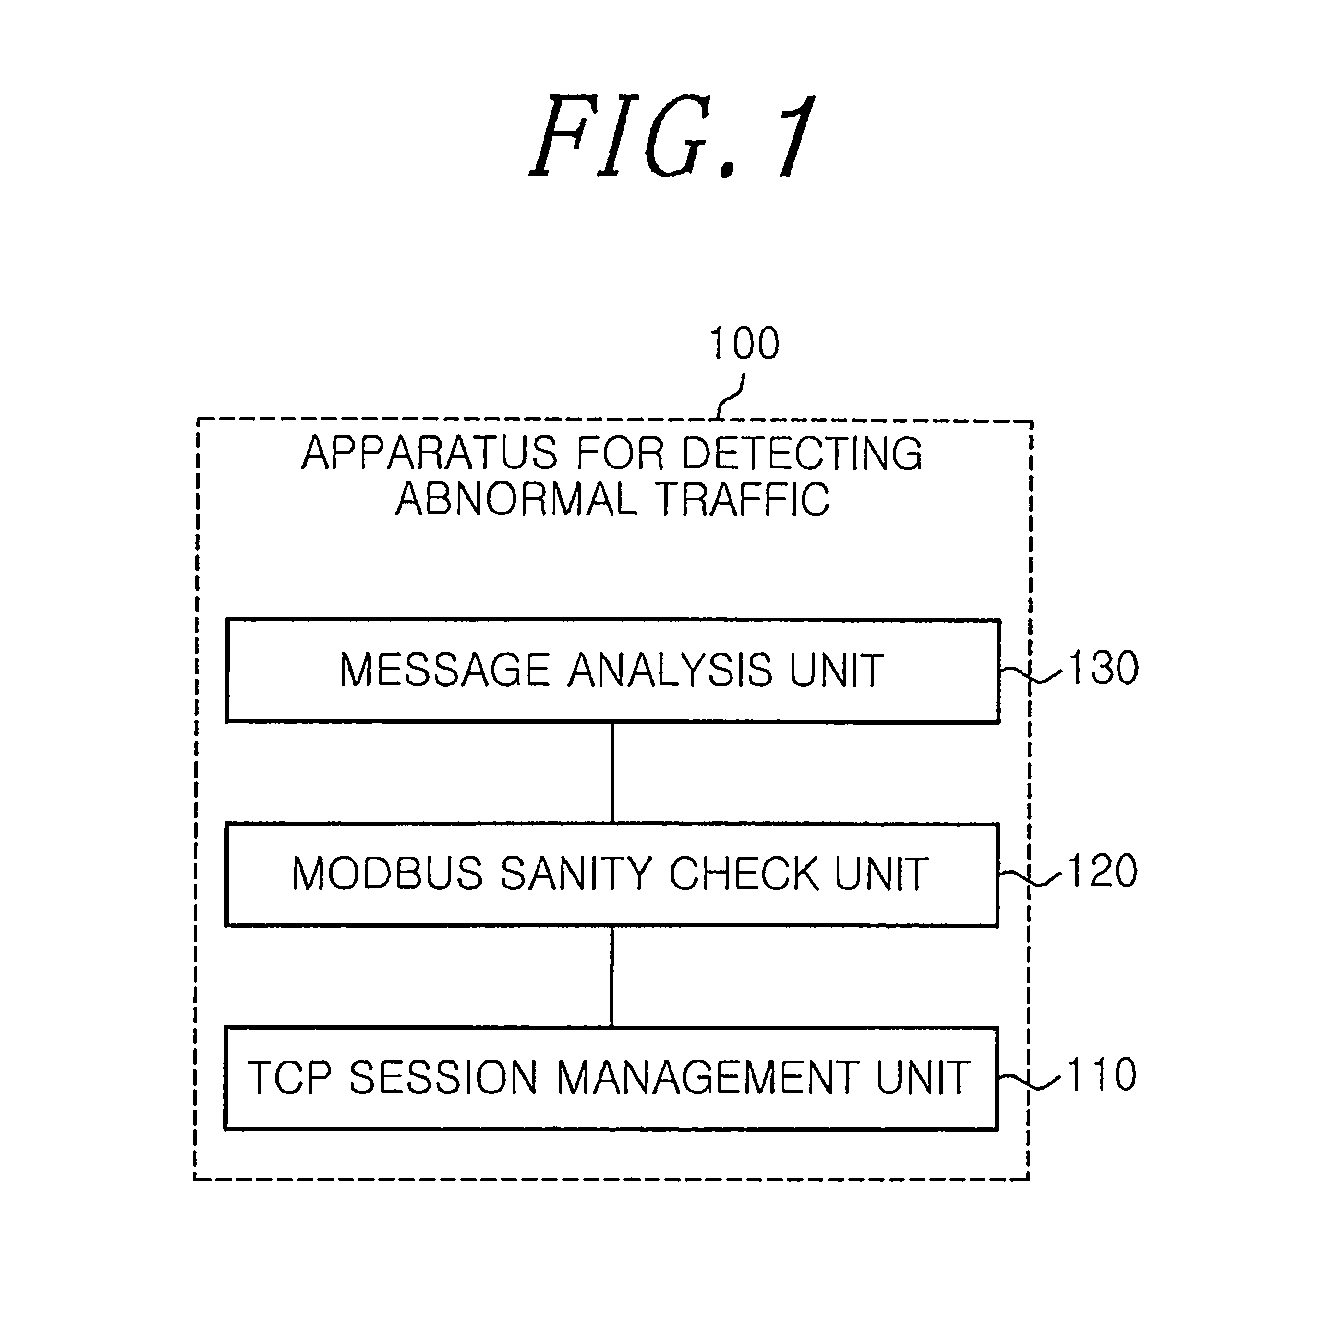 Method for detecting abnormal traffic on control system protocol